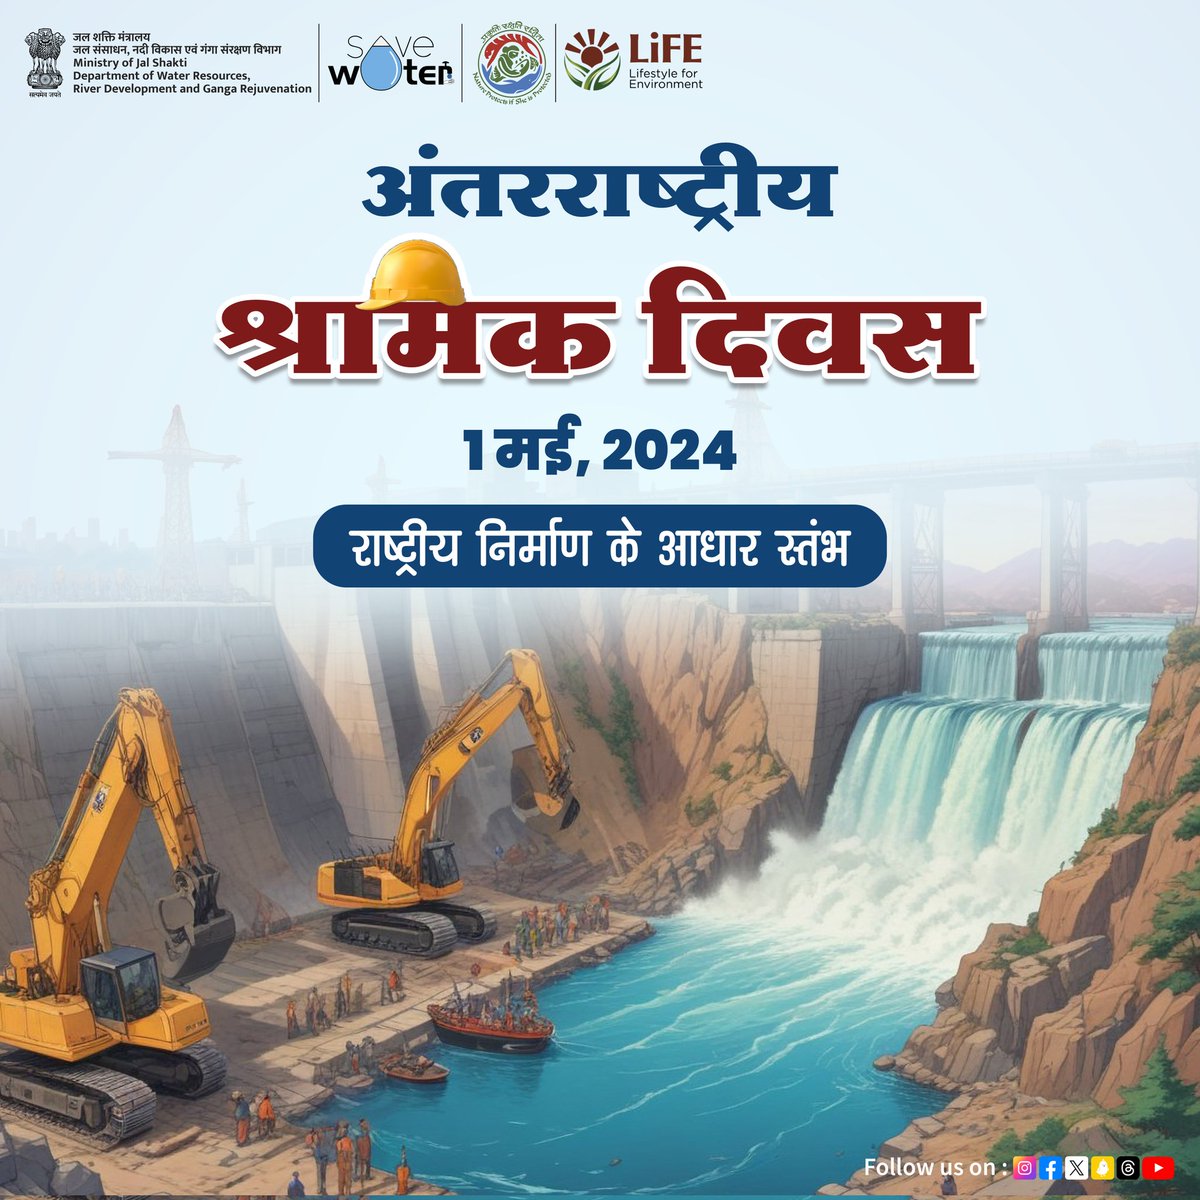 On this #LabourDay, we honor the unwavering commitment of workers who diligently repair dams and clean rivers. Your dedication not only strengthens infrastructure but also safeguards our natural environment. Thank you for your essential contributions! #DRIP #NamamiGange #DoWR